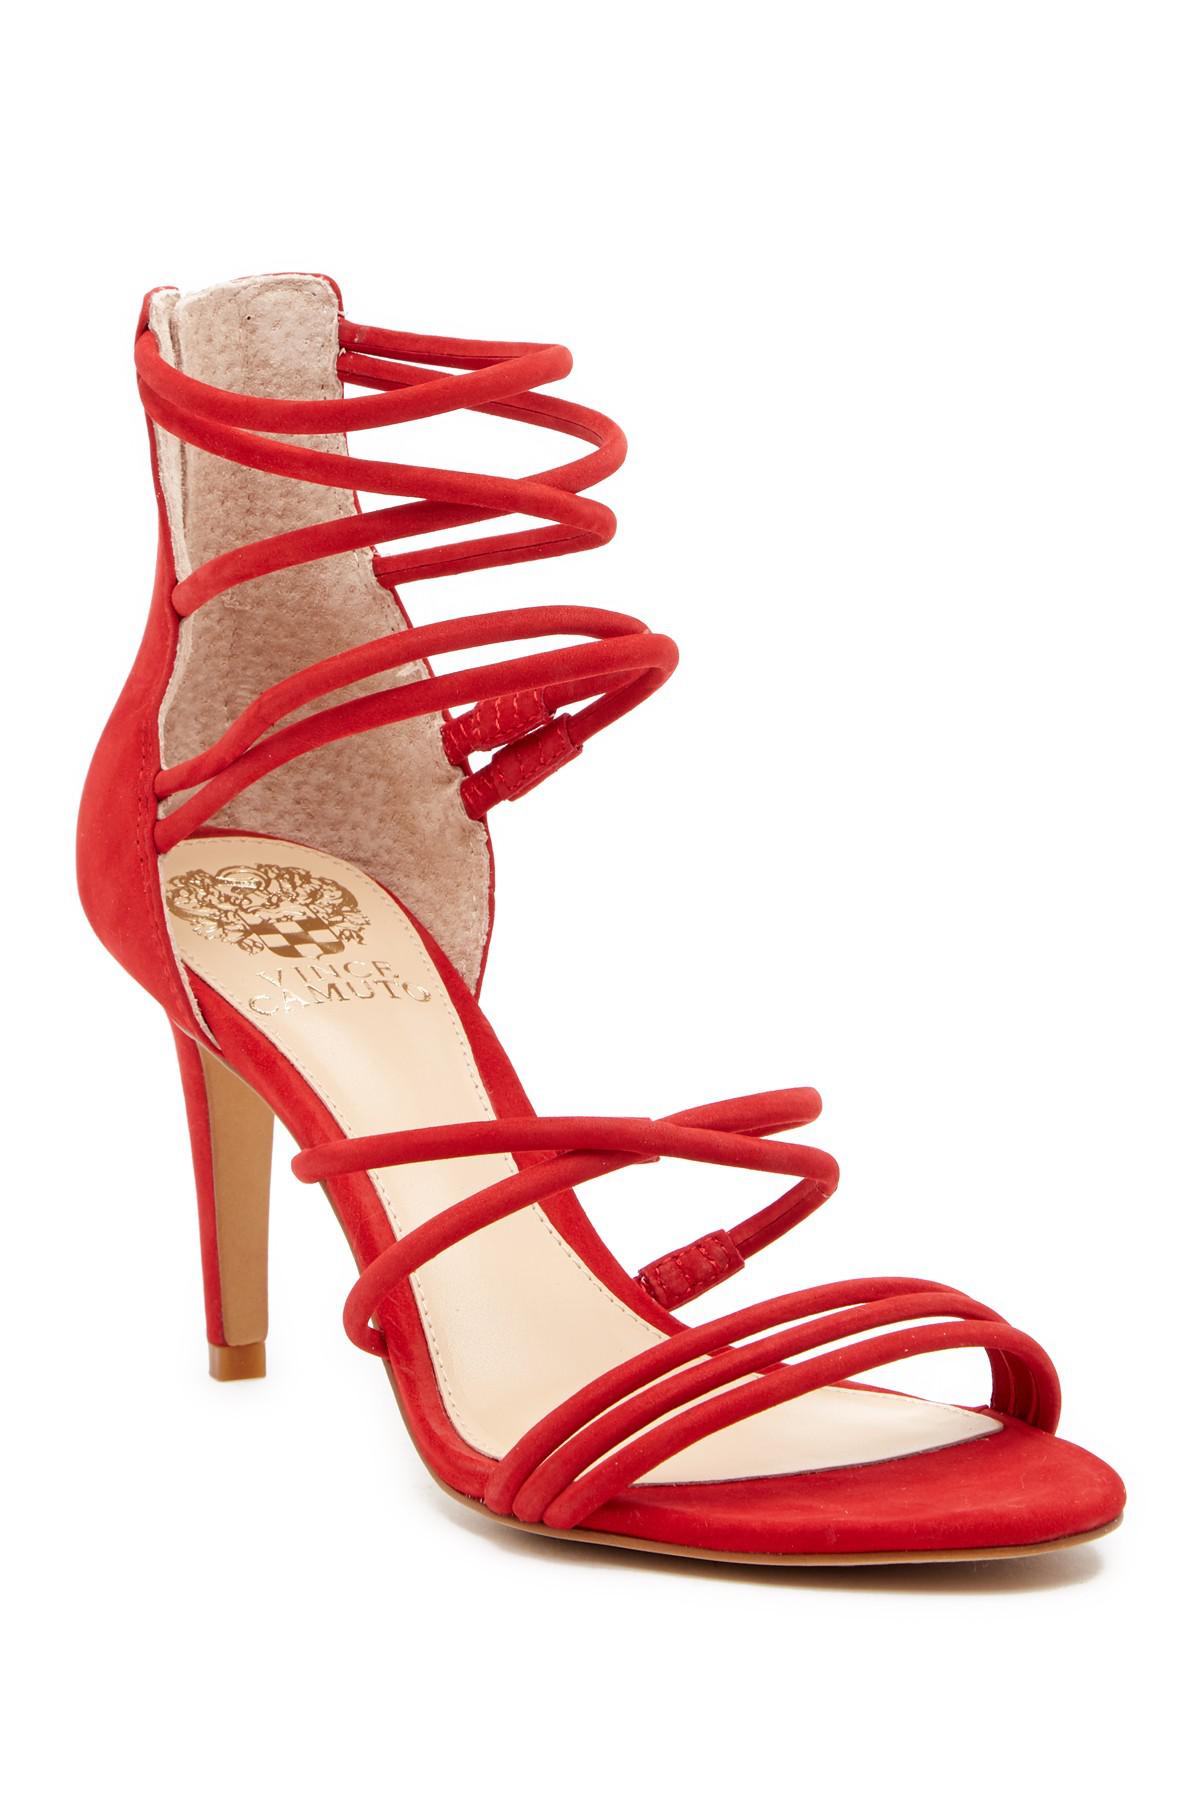 Vince Camuto Leather Cadella Strappy Sandal in Red - Lyst